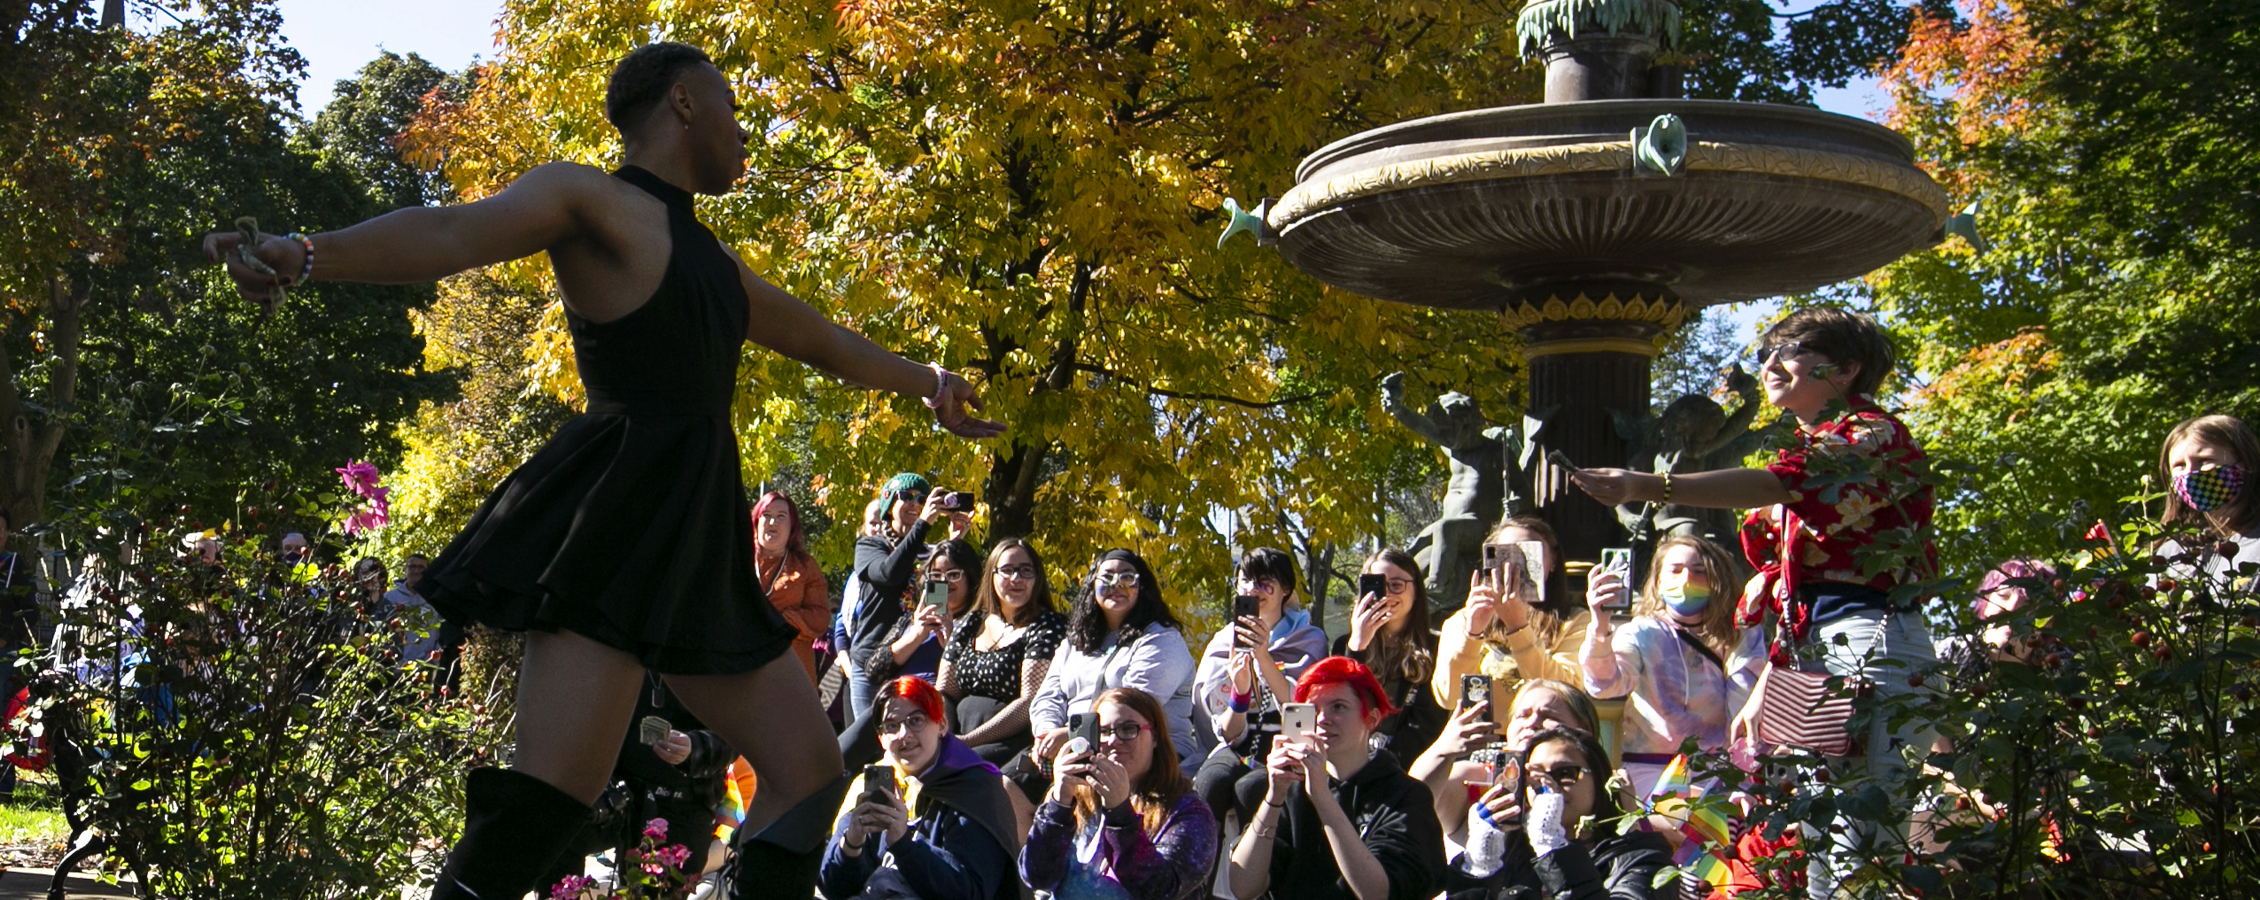 A person dances outdoors in front of a crowd by a water fountain.